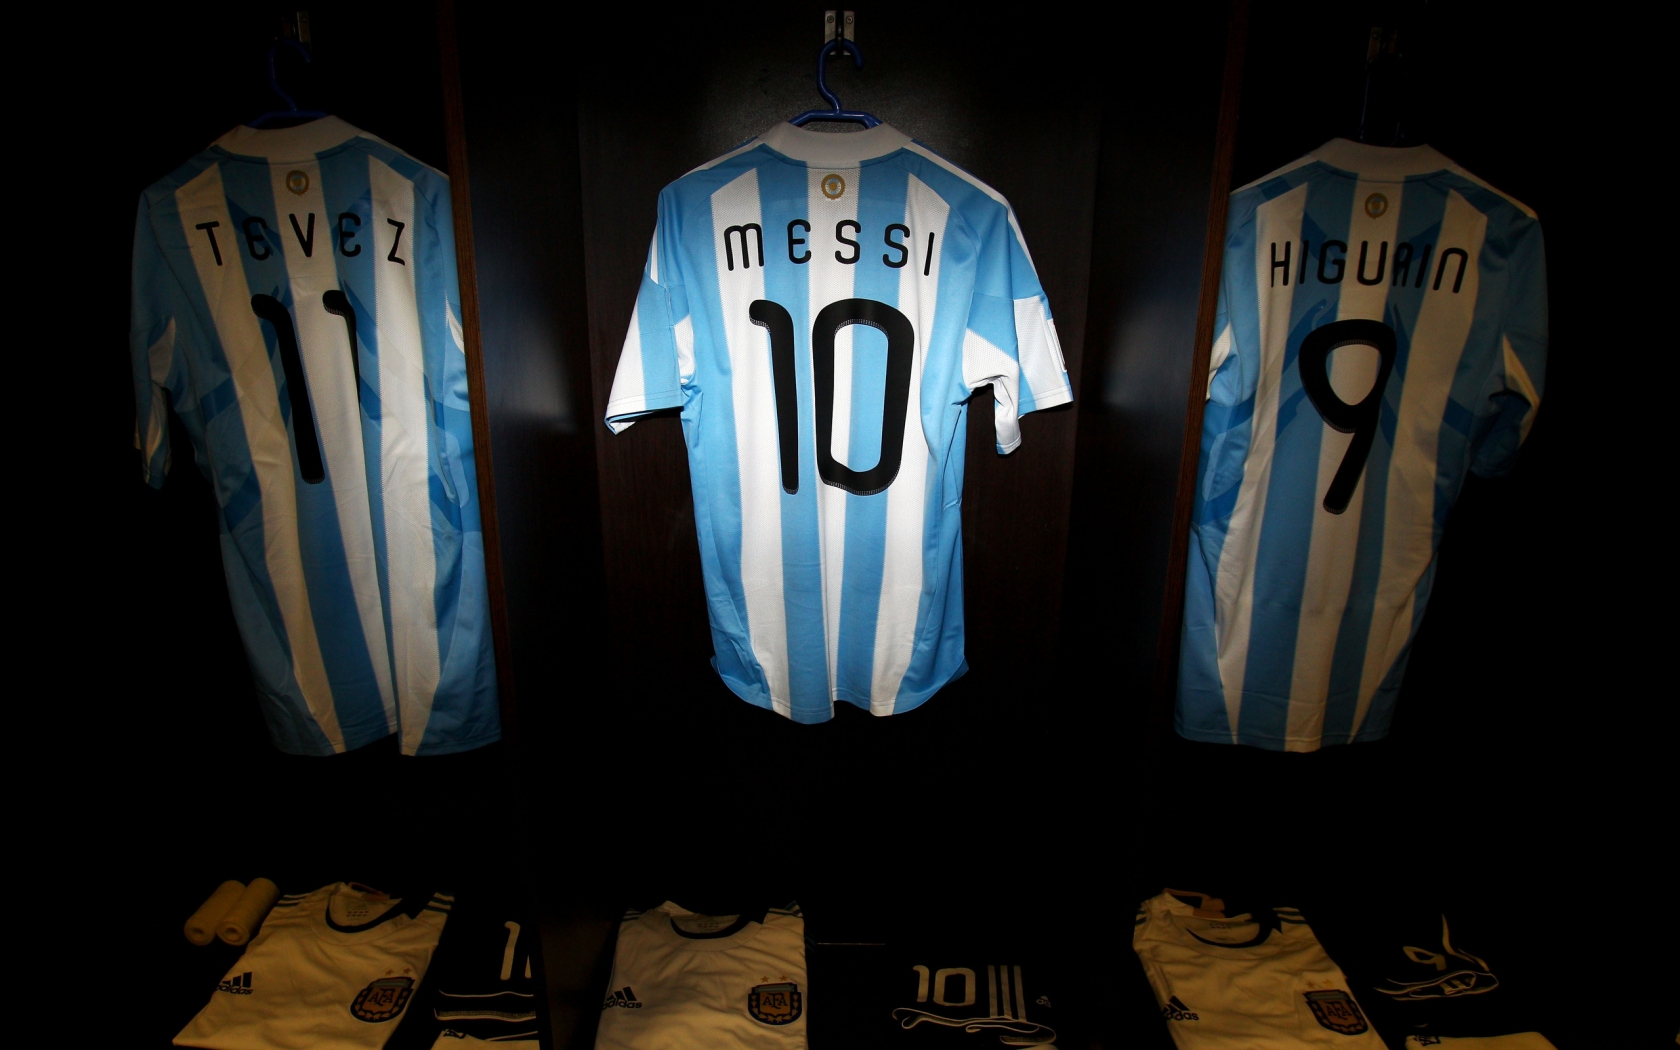 Tshirt of Messi, Tevez and Higuain for 1680 x 1050 widescreen resolution